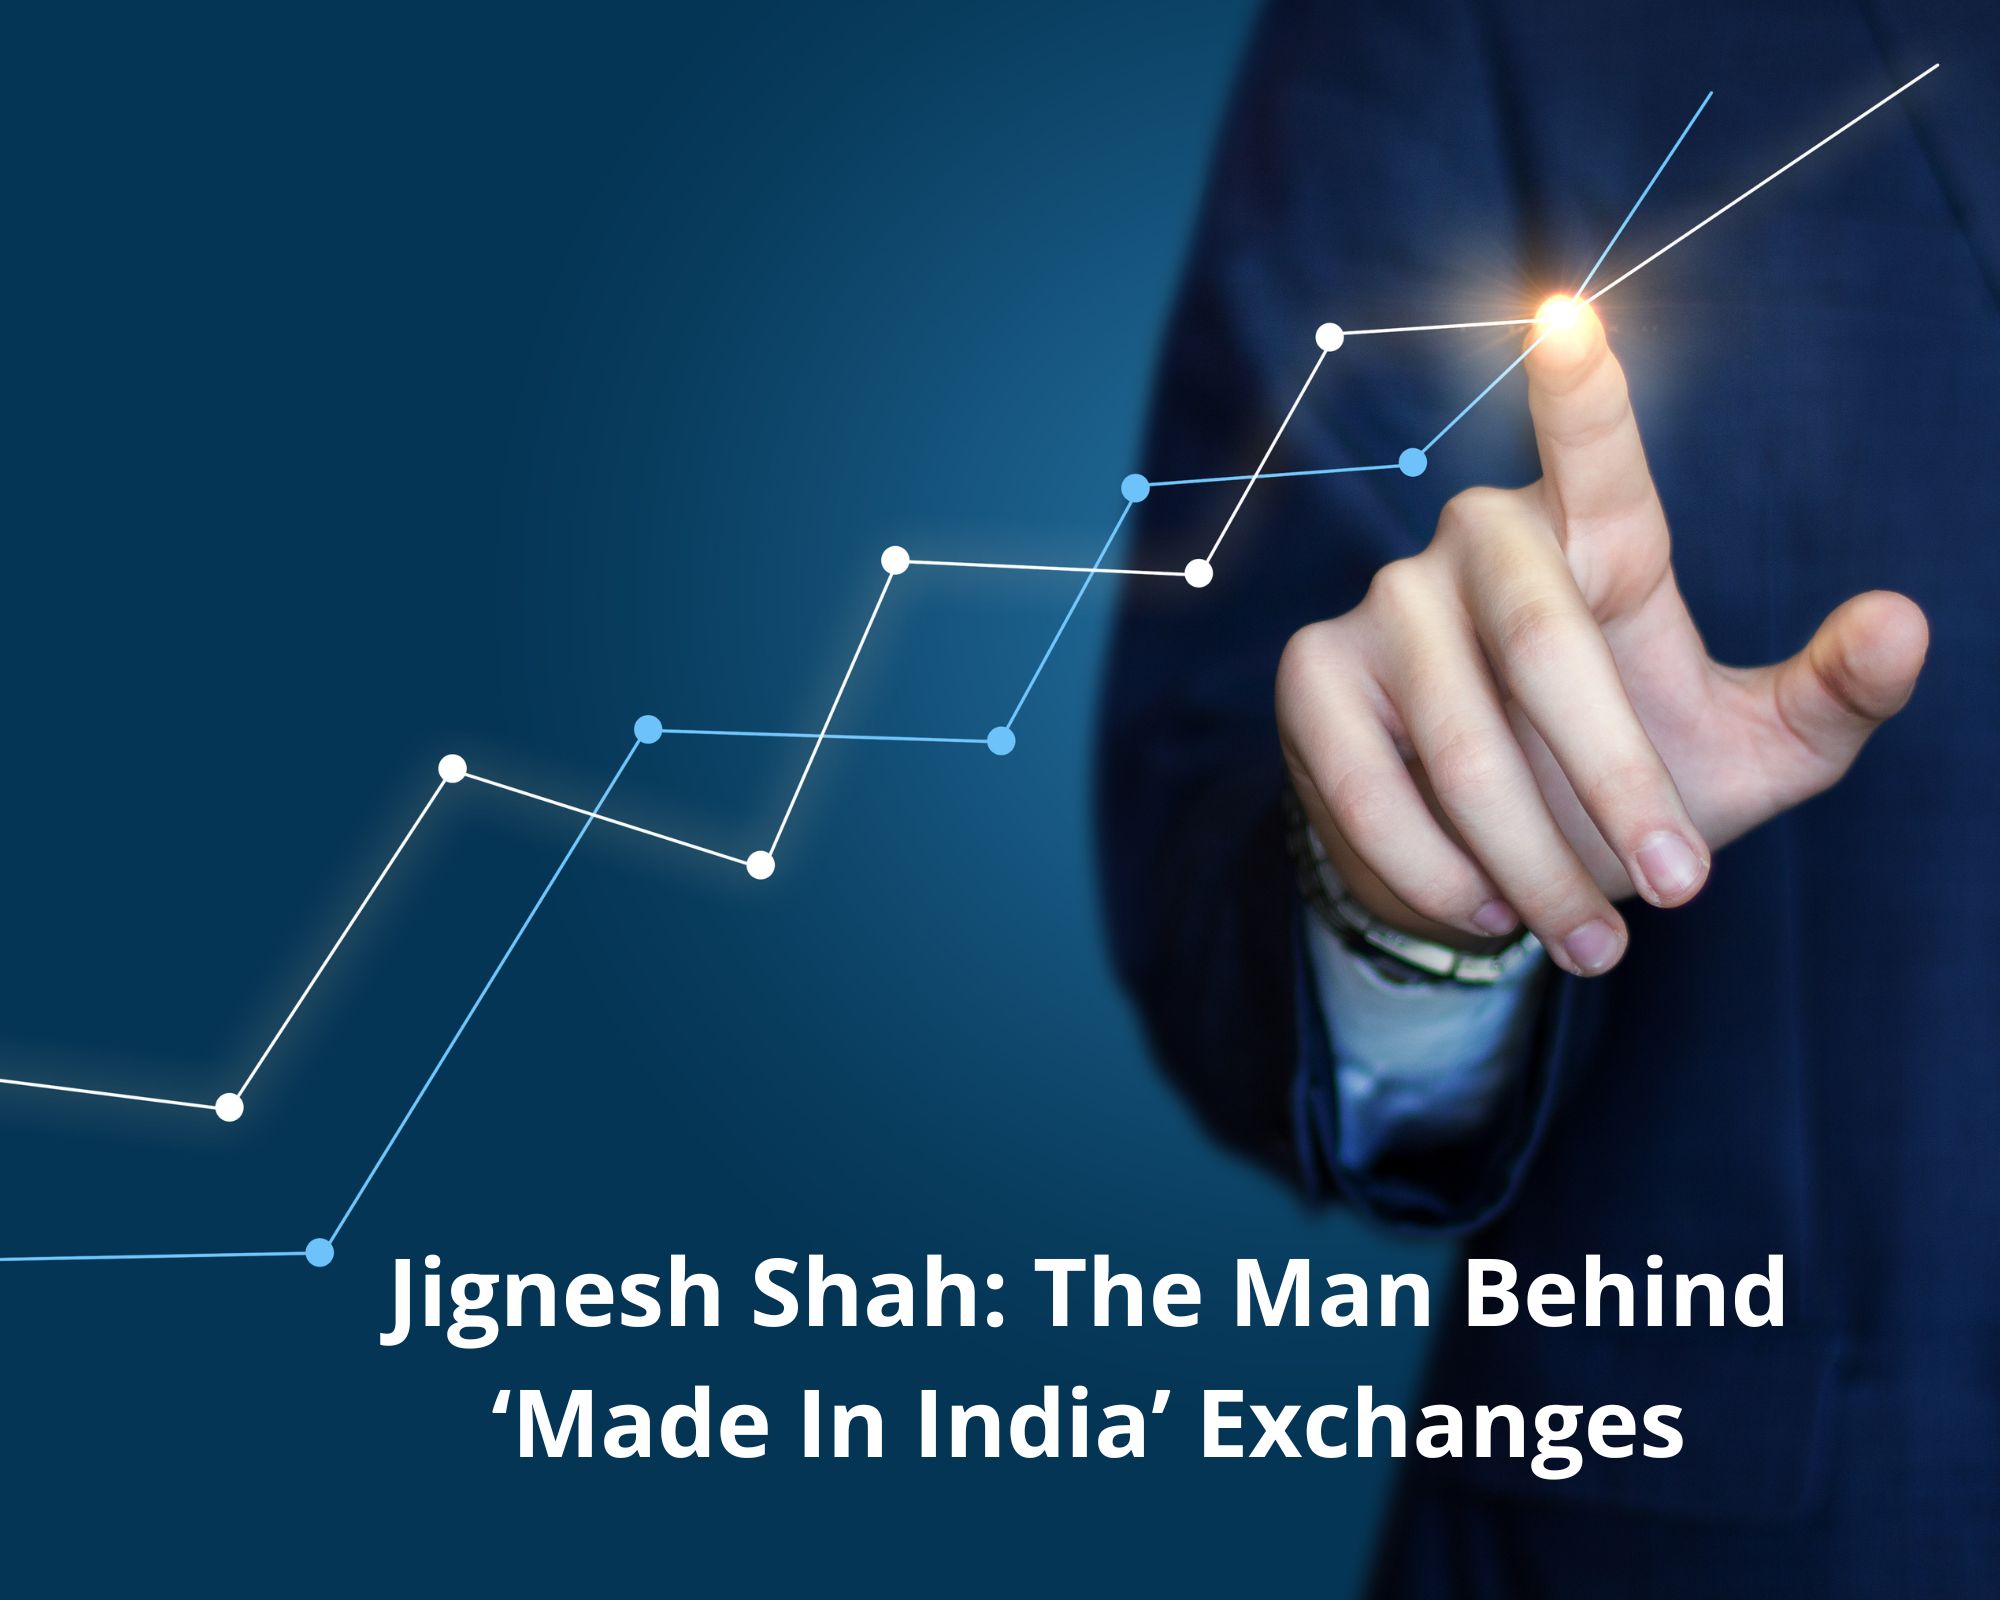 Jignesh Shah: The Man Behind ‘Made In India’ Exchanges